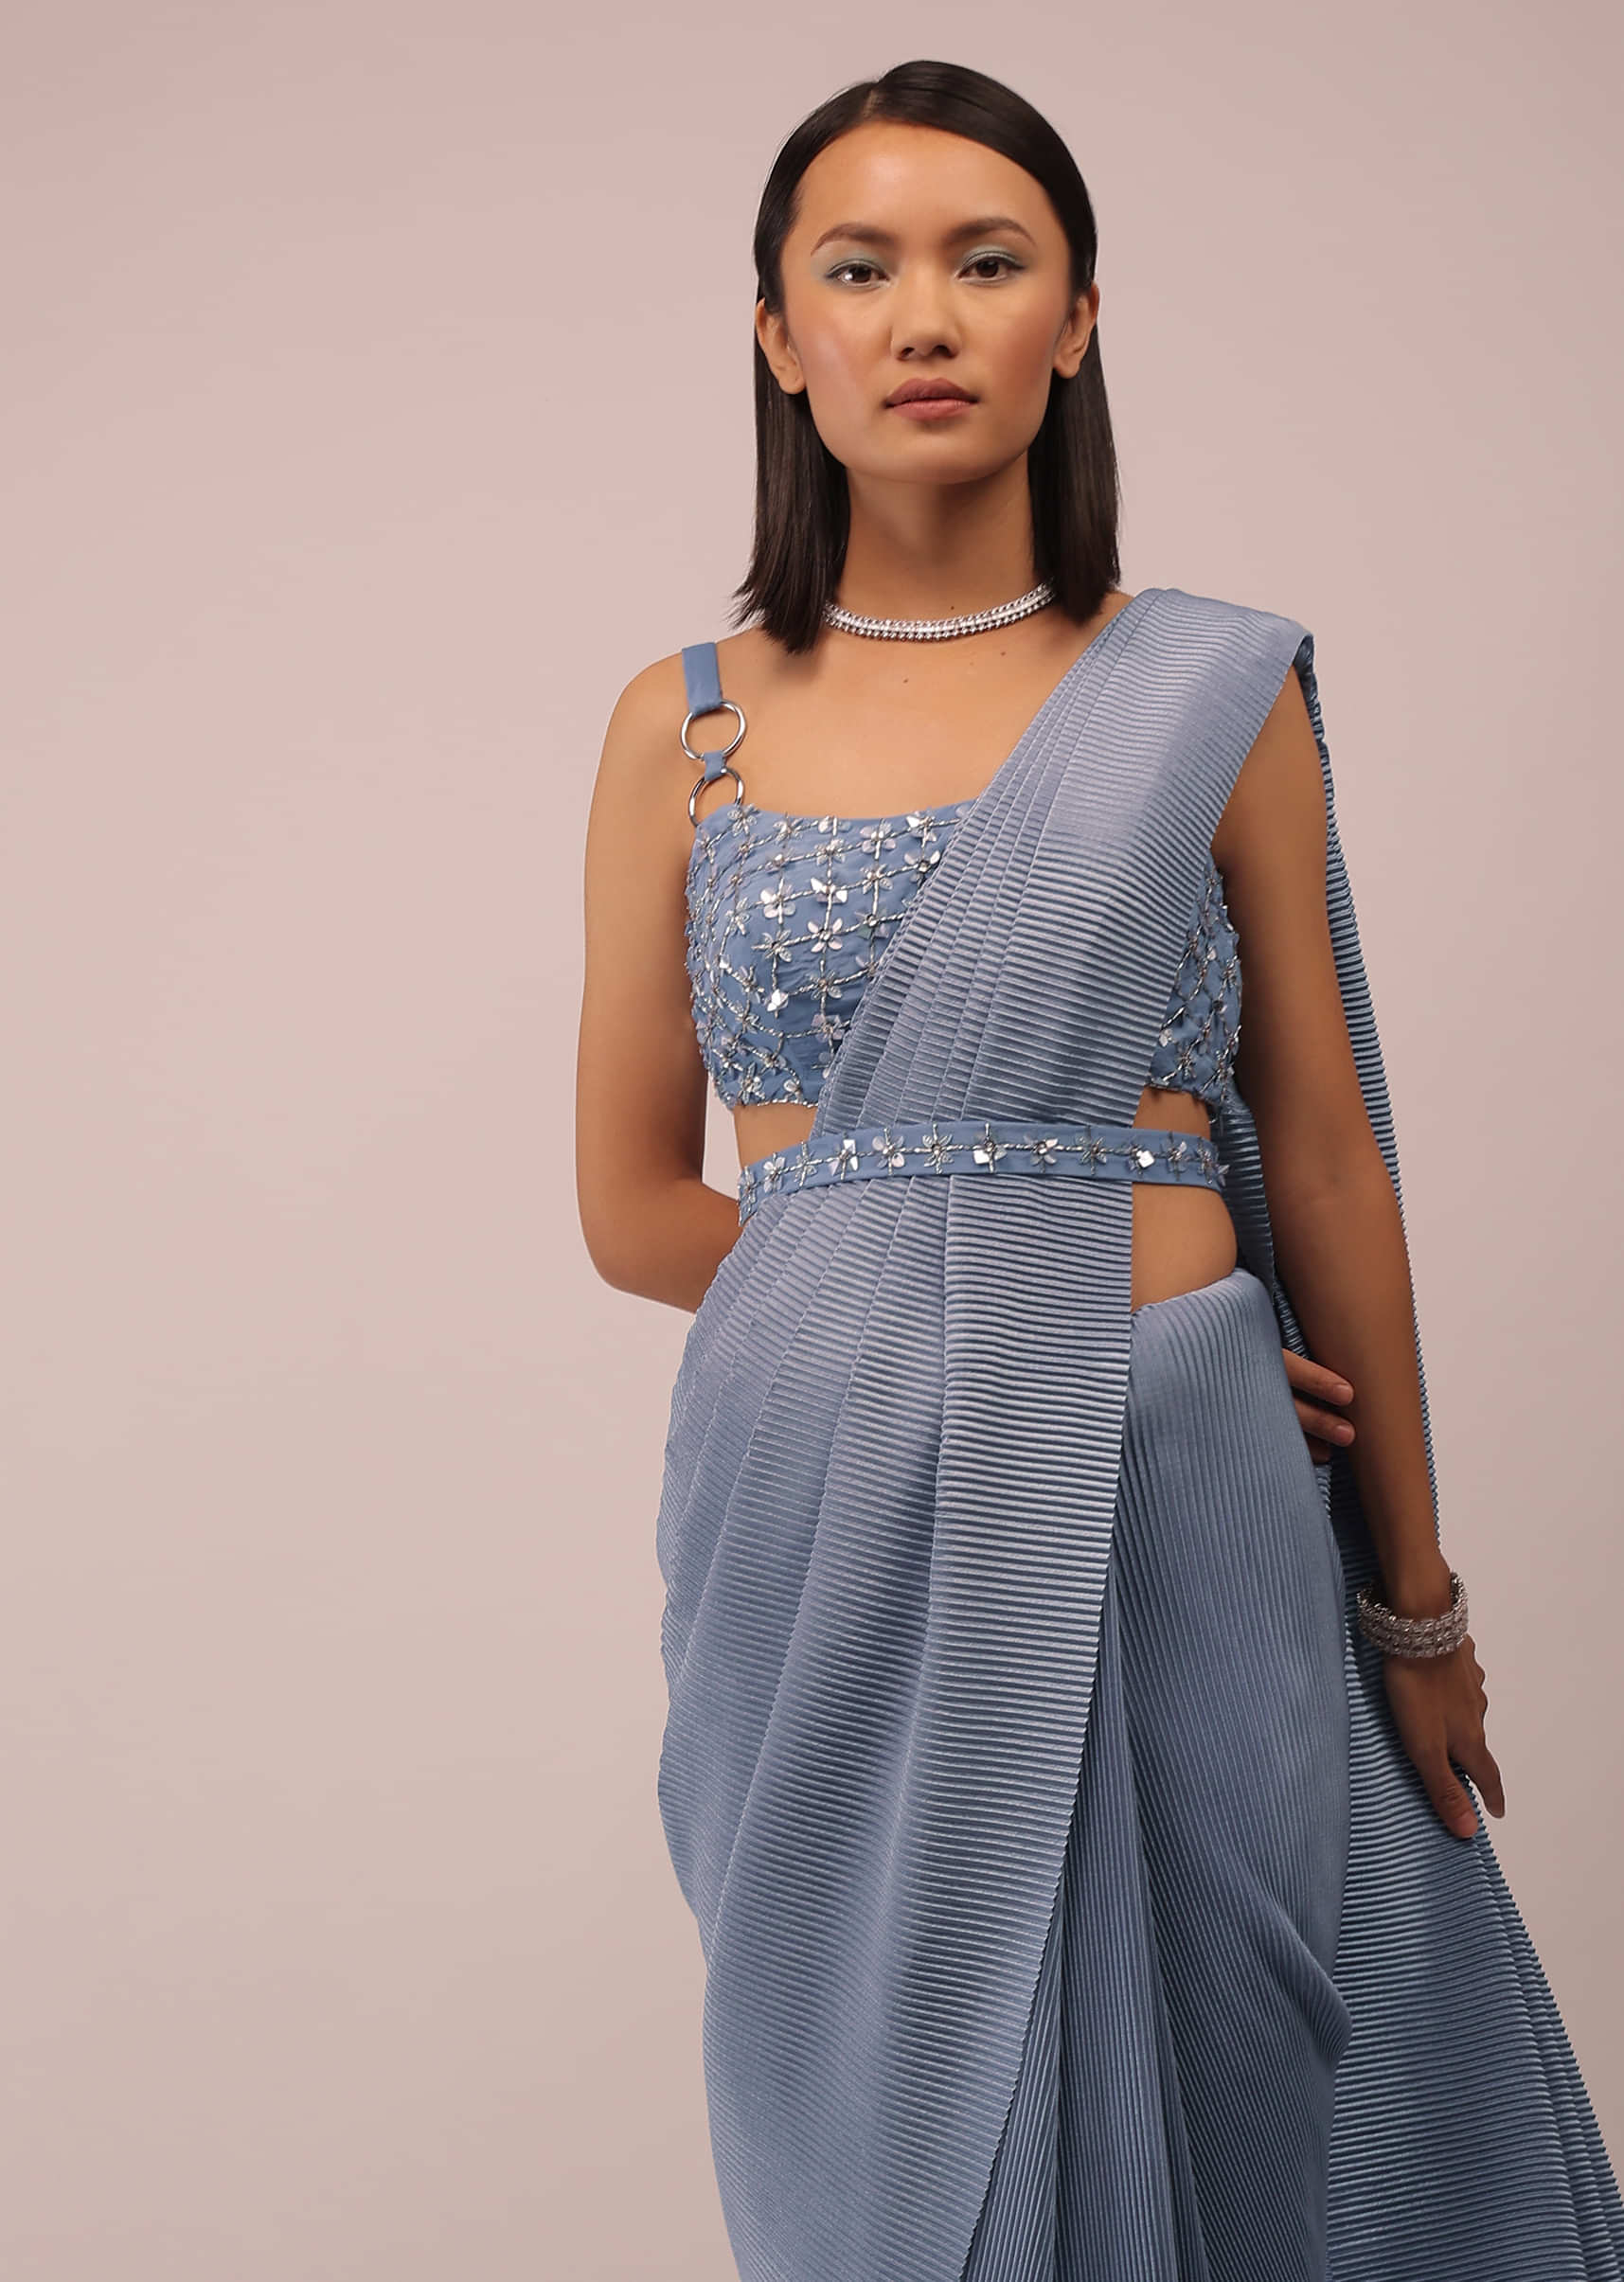 Faded Denim Saree With Buckle Strap Sleeves Crop Top In Sequins Embroidery With An Embroidery Belt In Sequins And 3D Petals